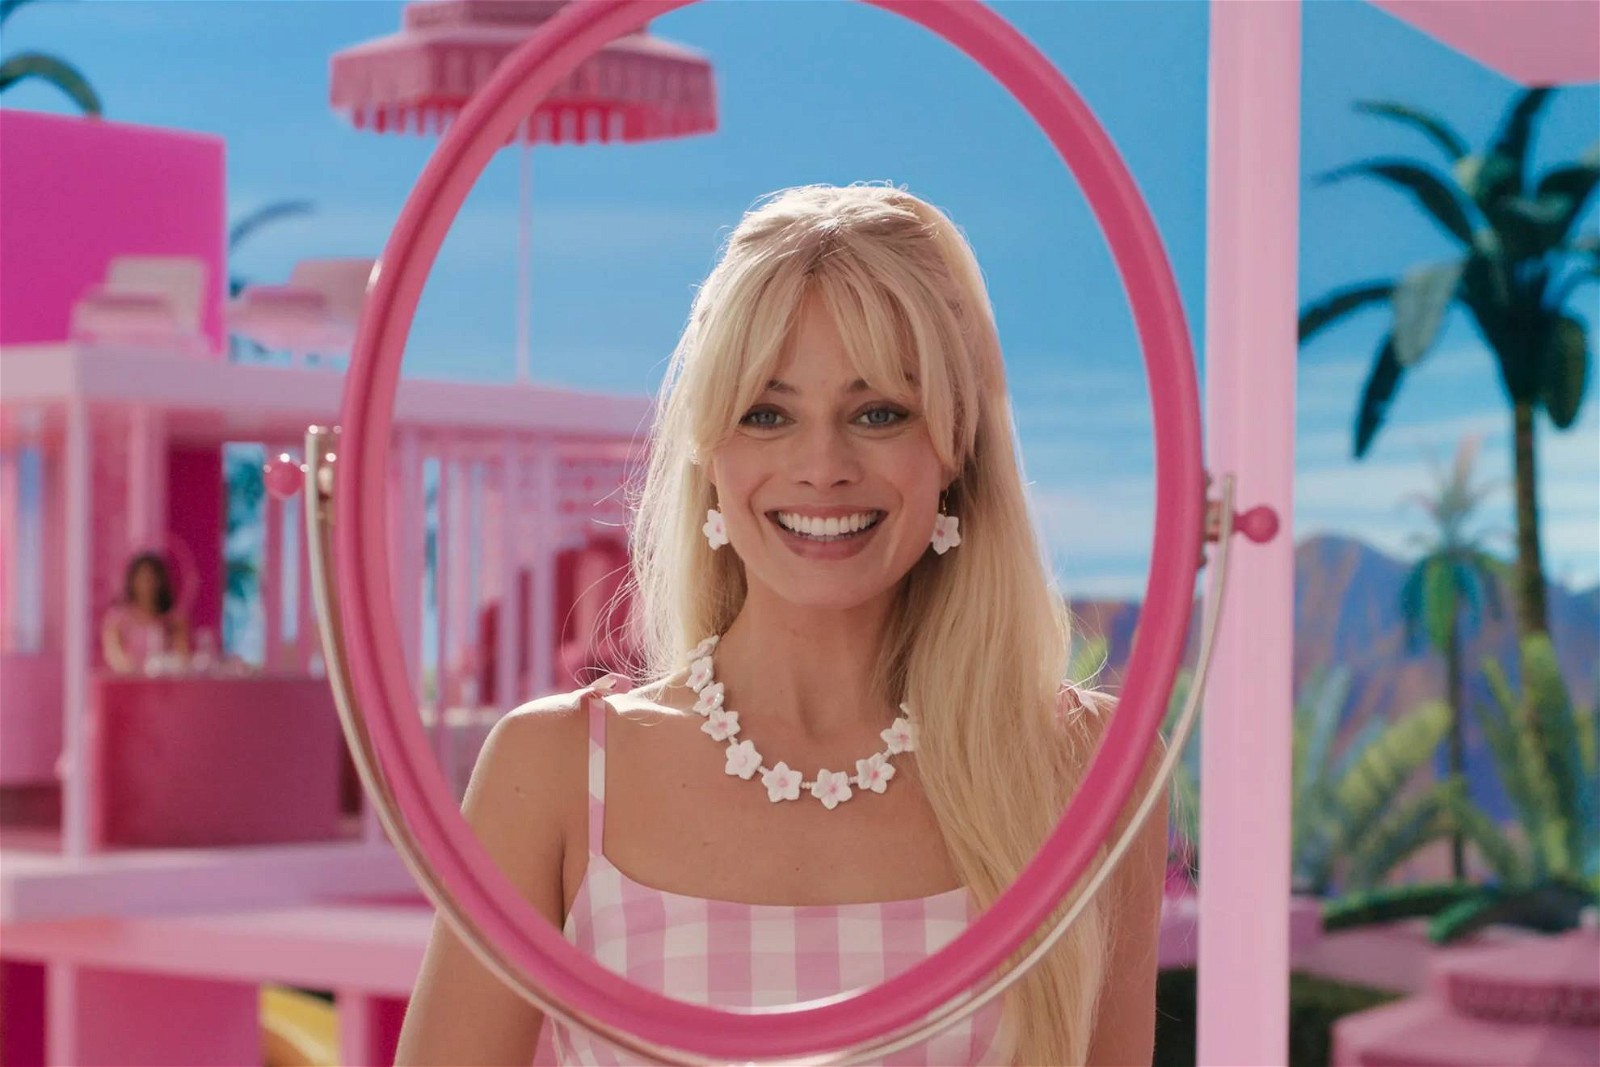 Which Oscar-Winning Actress Might Star in the Barbie Movie?